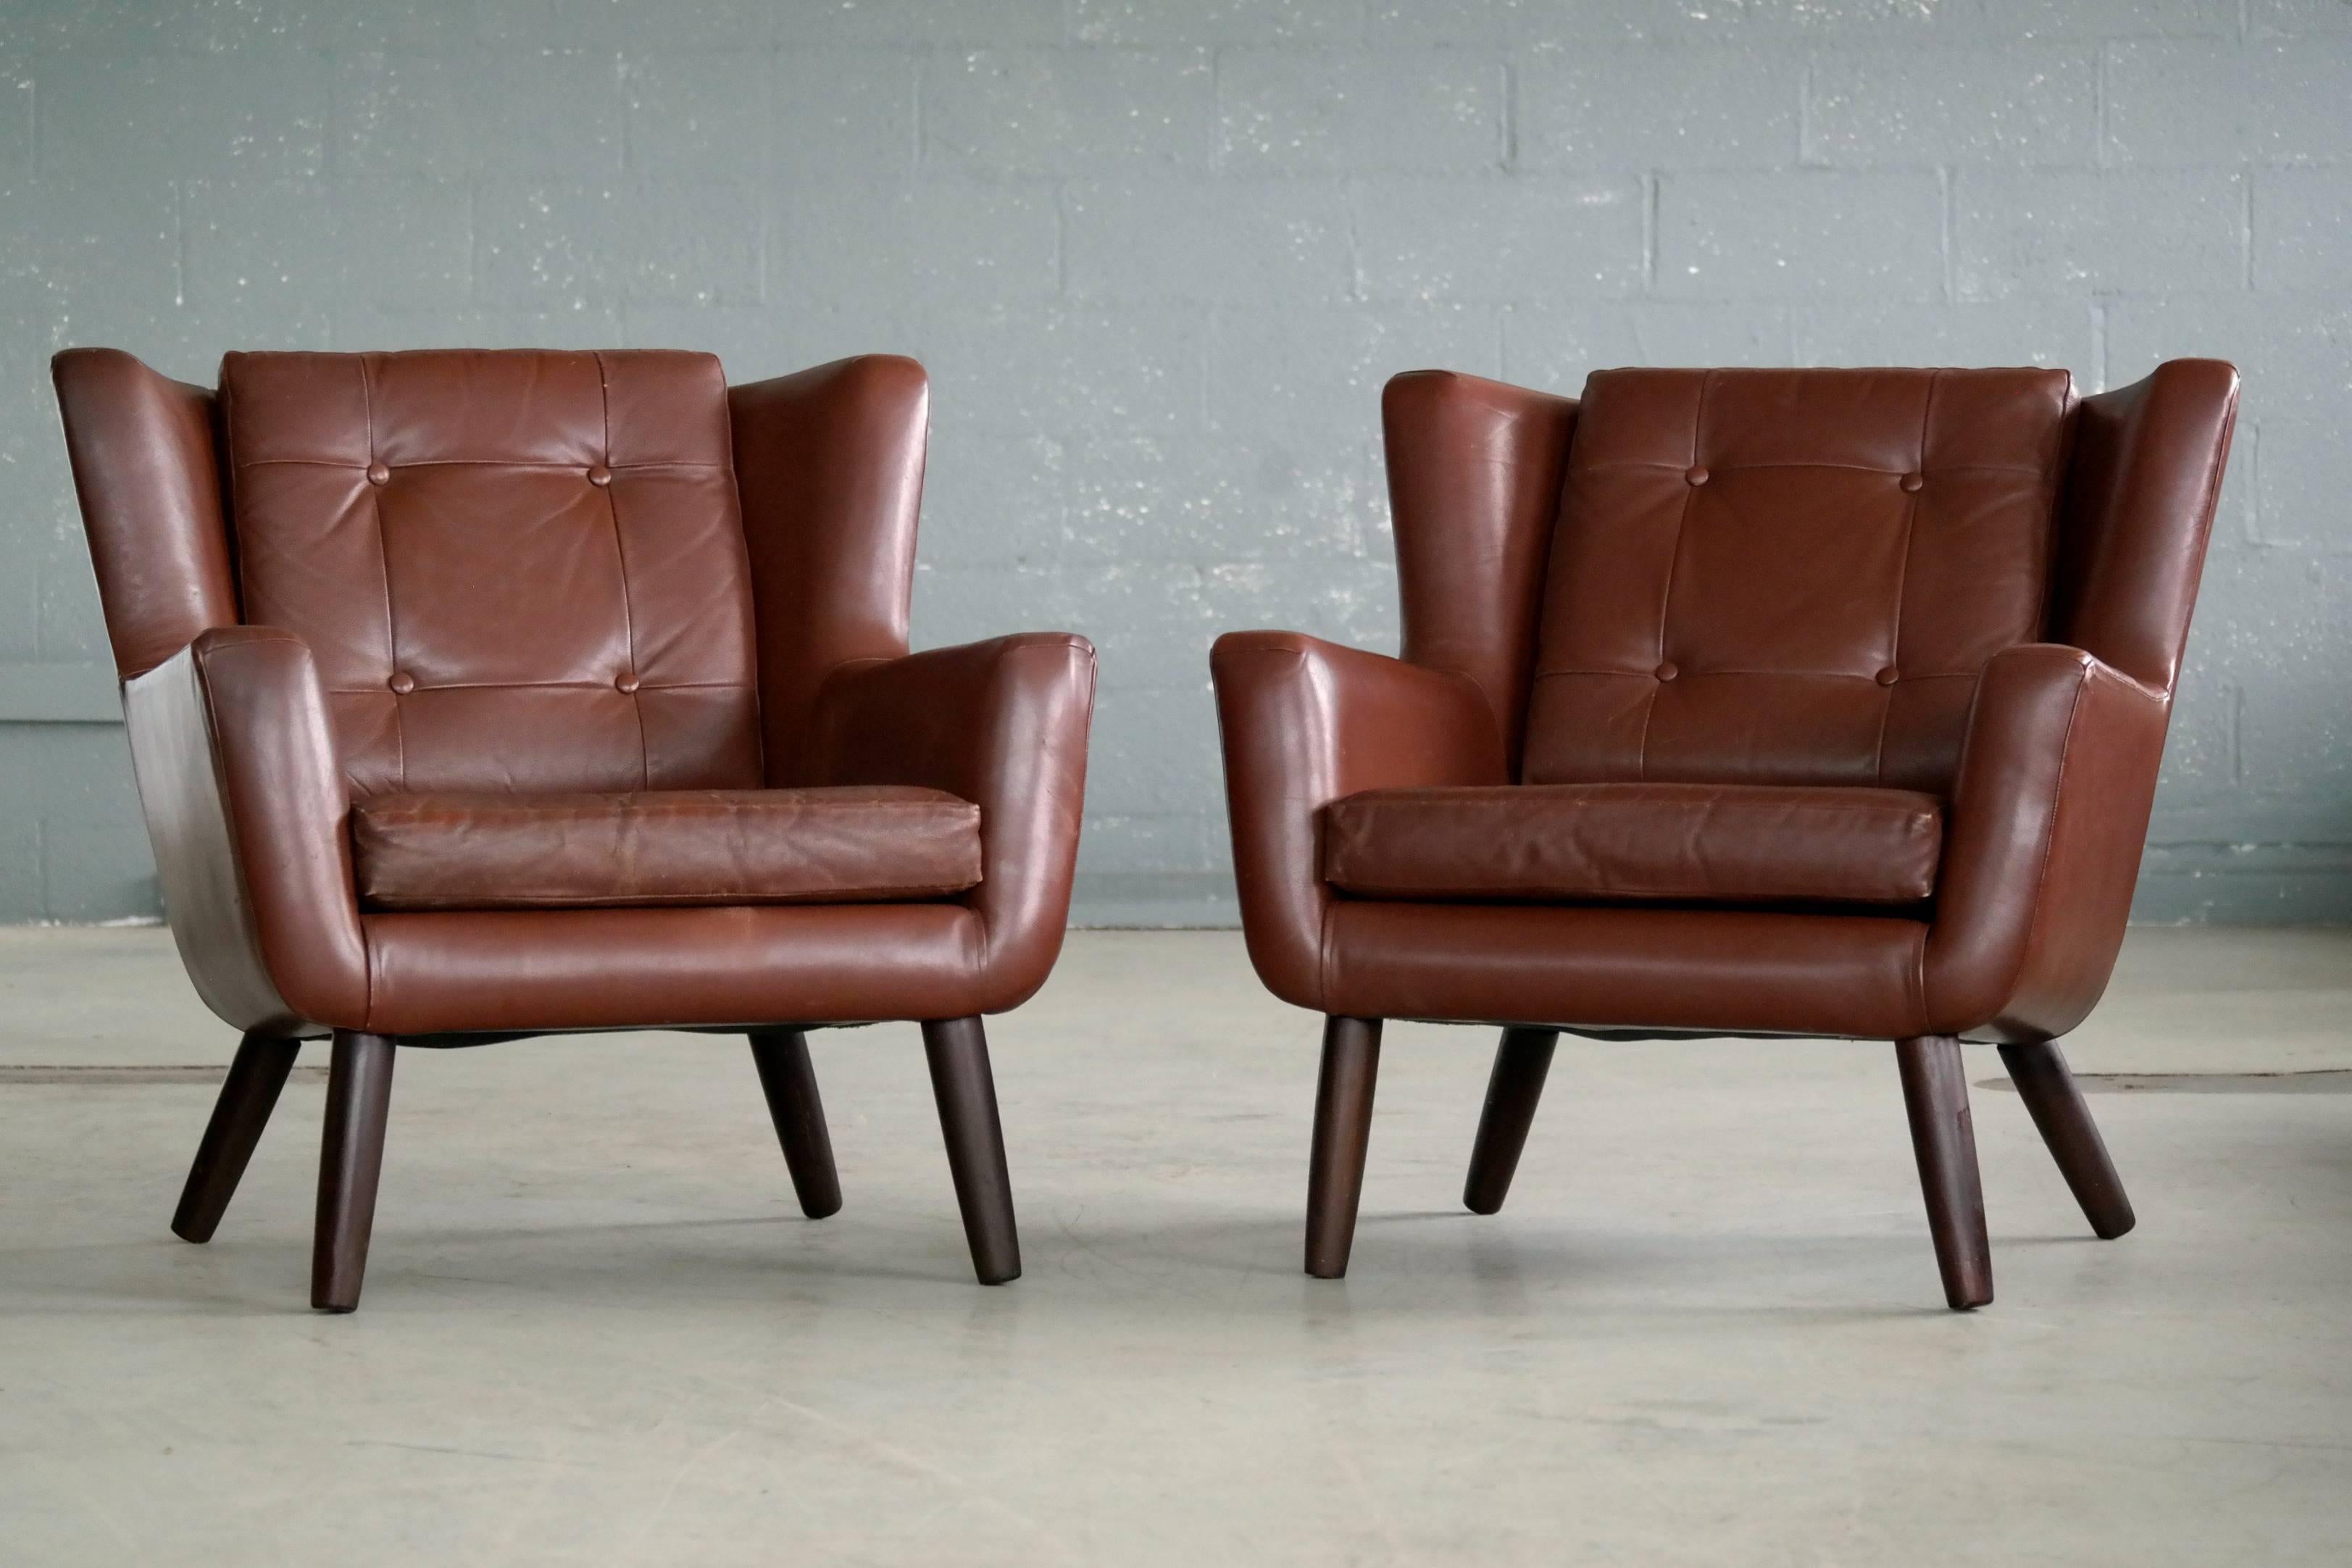 Pair of very charming easy chairs in a nice warm chestnut brown colored leather with tufted back and seat cushions raised on solid teak legs made in the 1960s by Skjold Sørensen of Denmark. Skjold Sørensen had a unique and very characteristic design